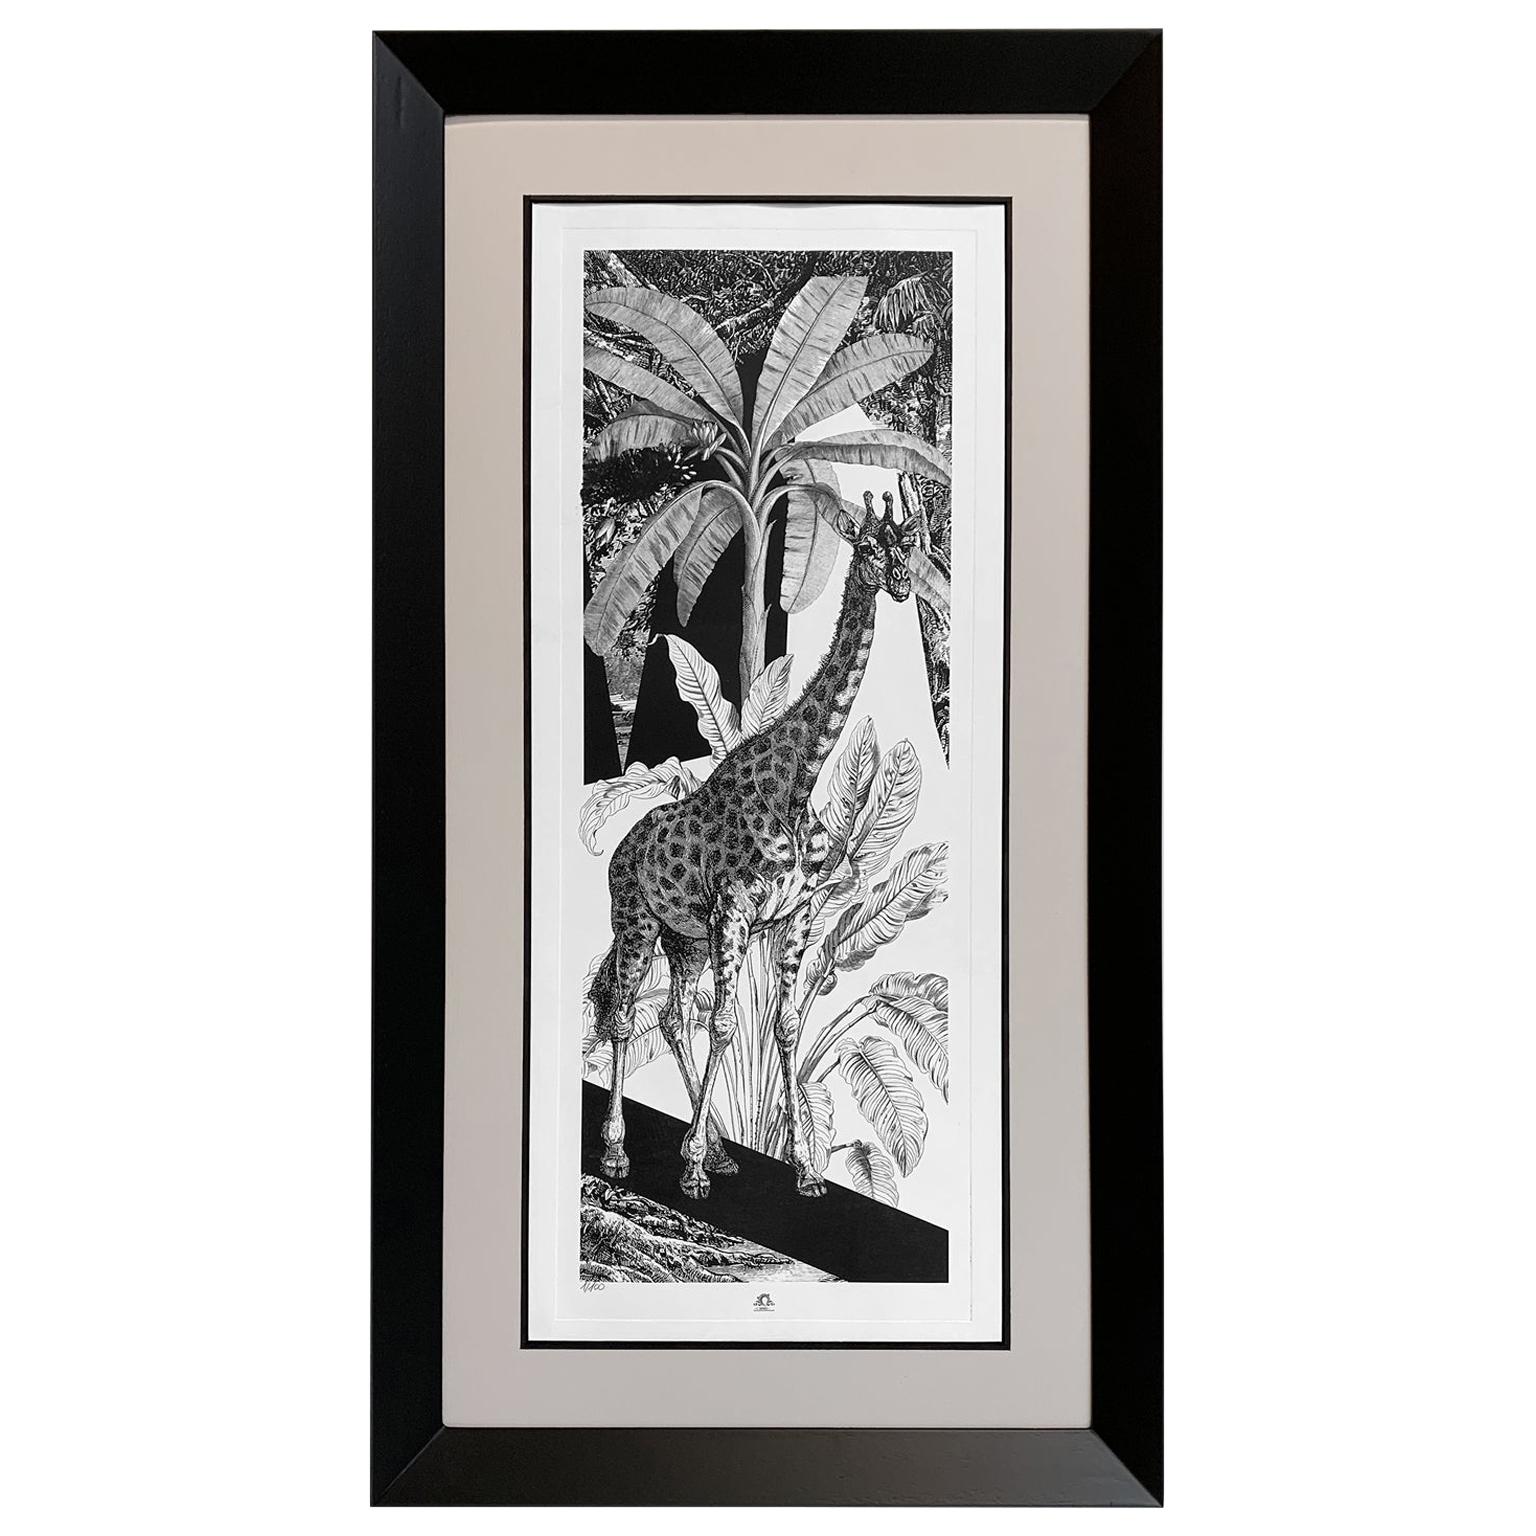 Italian Handmade Limited Edition Print "Black & Wild" Collection For Sale